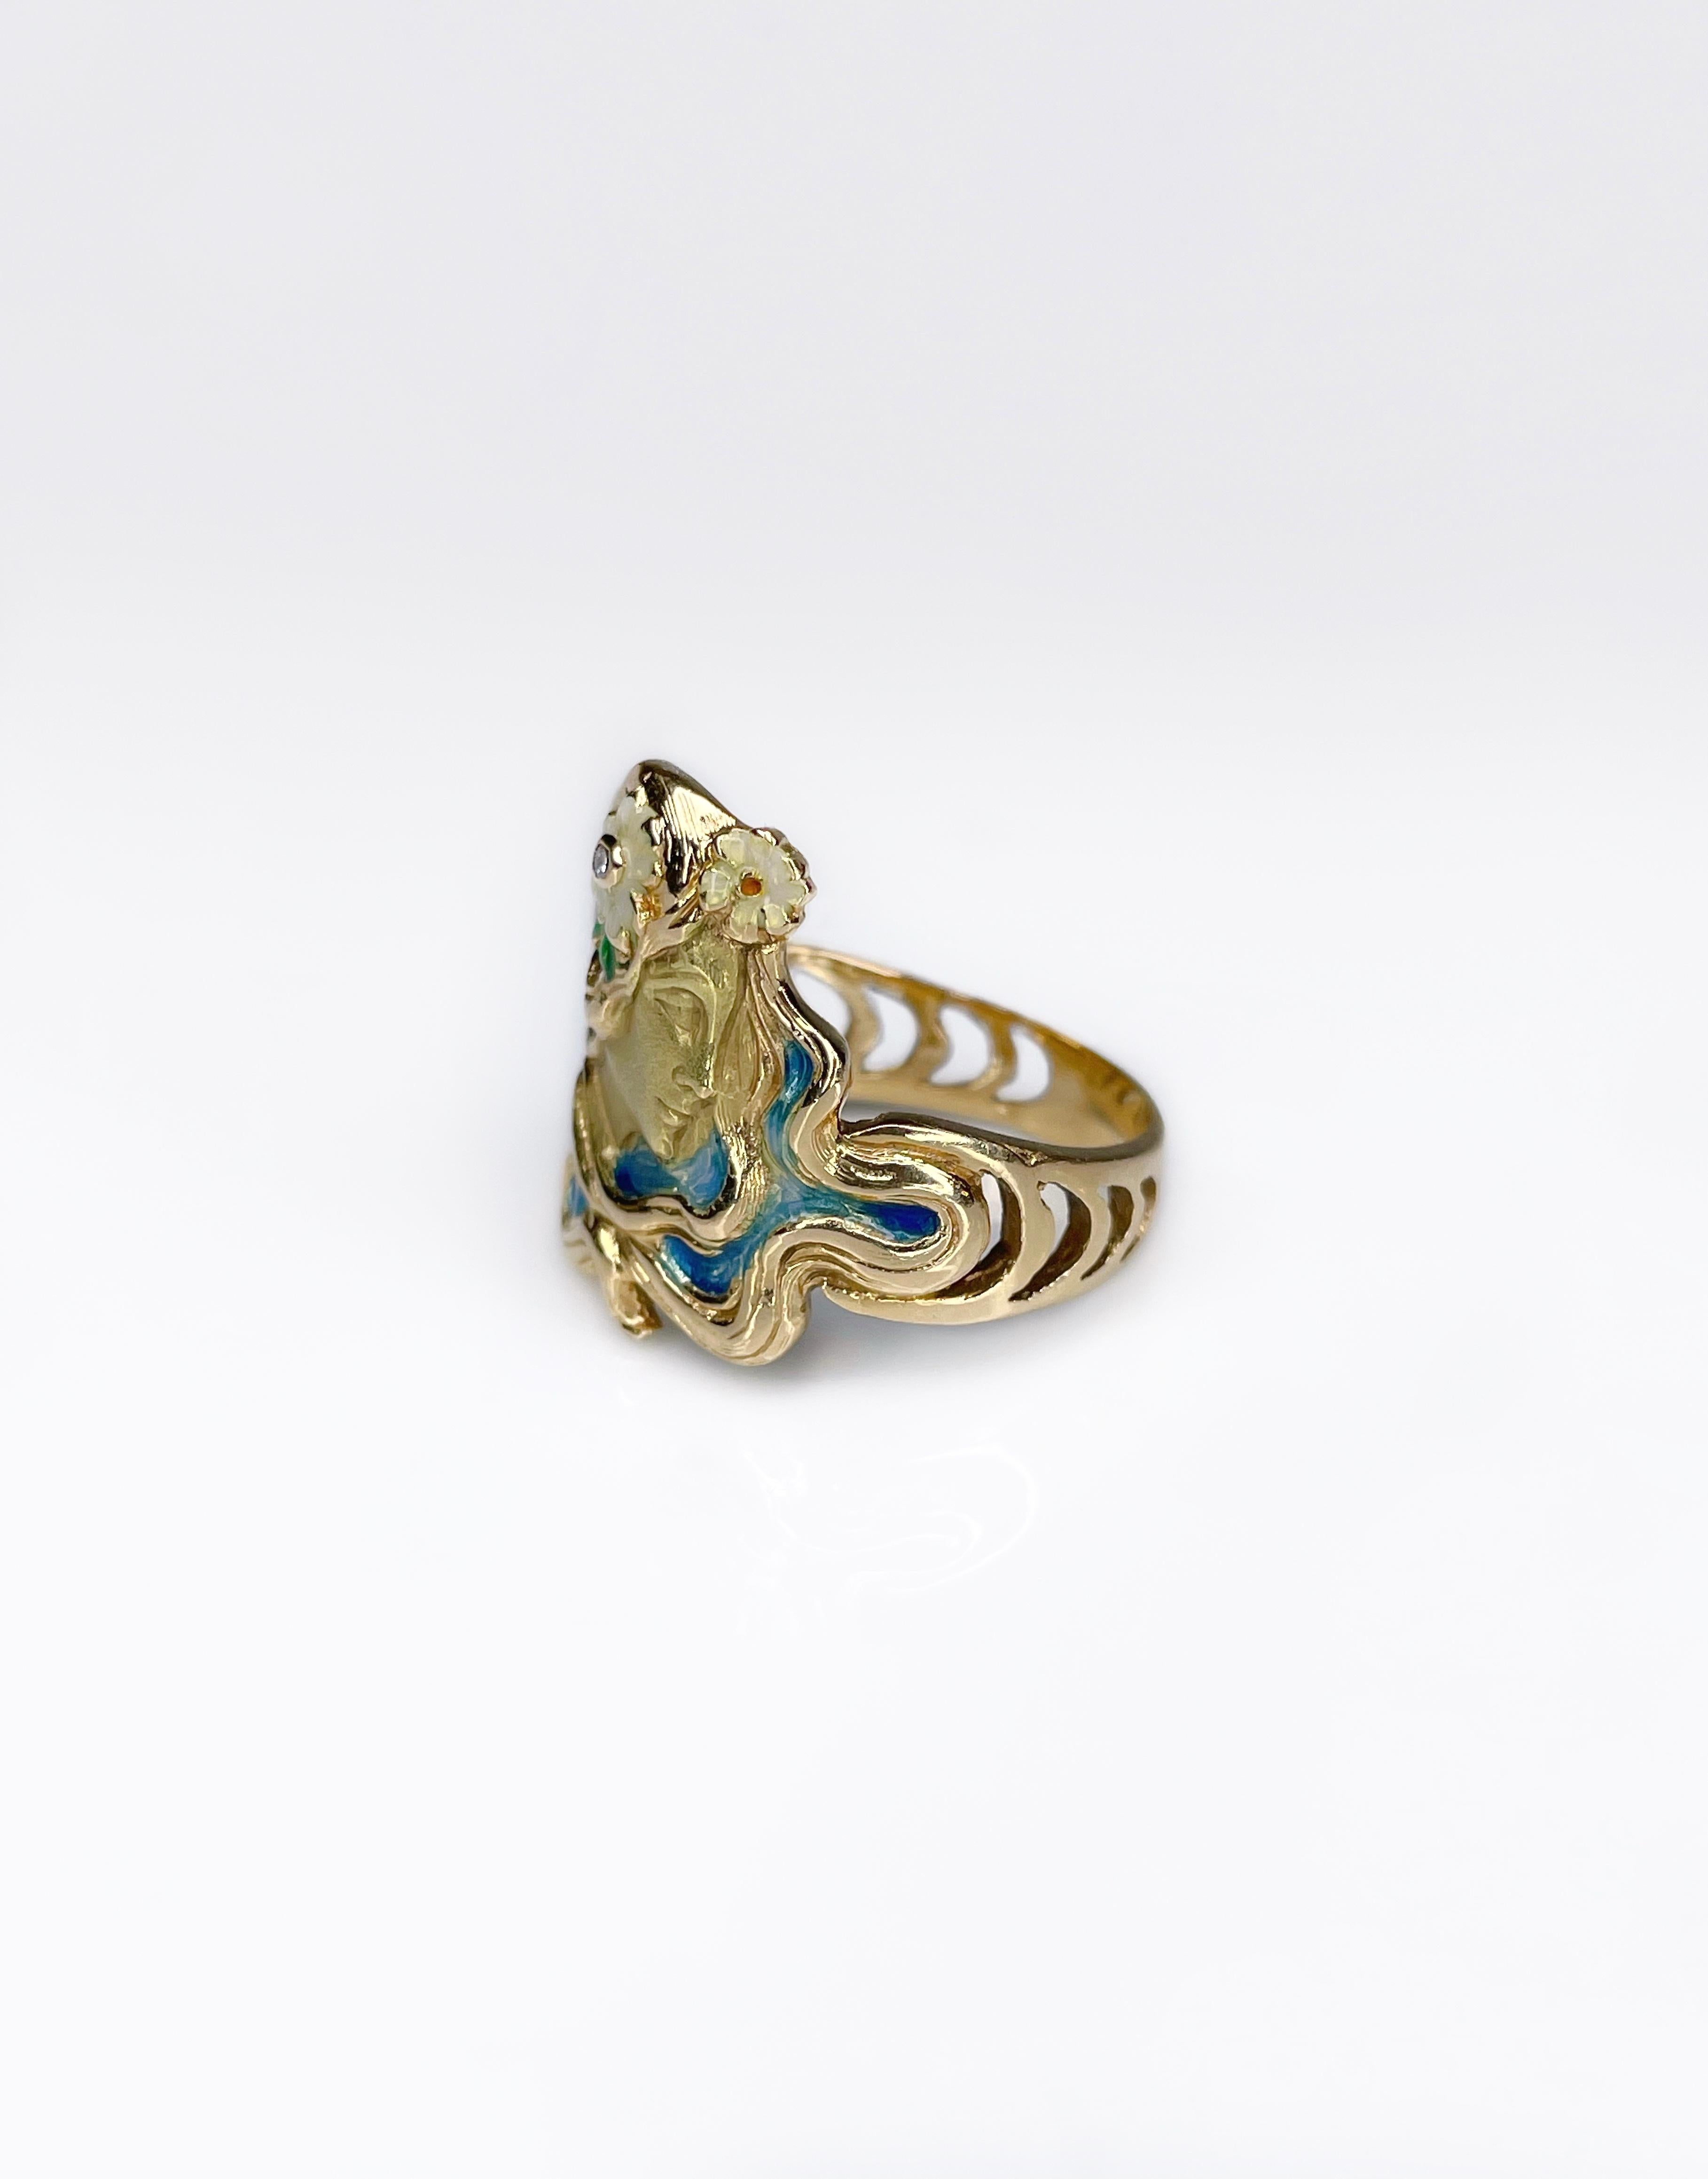 Brilliant Cut Art Nouveau Gold Enamel and Diamonds Ring Depicting the Face of Daisy Goddess